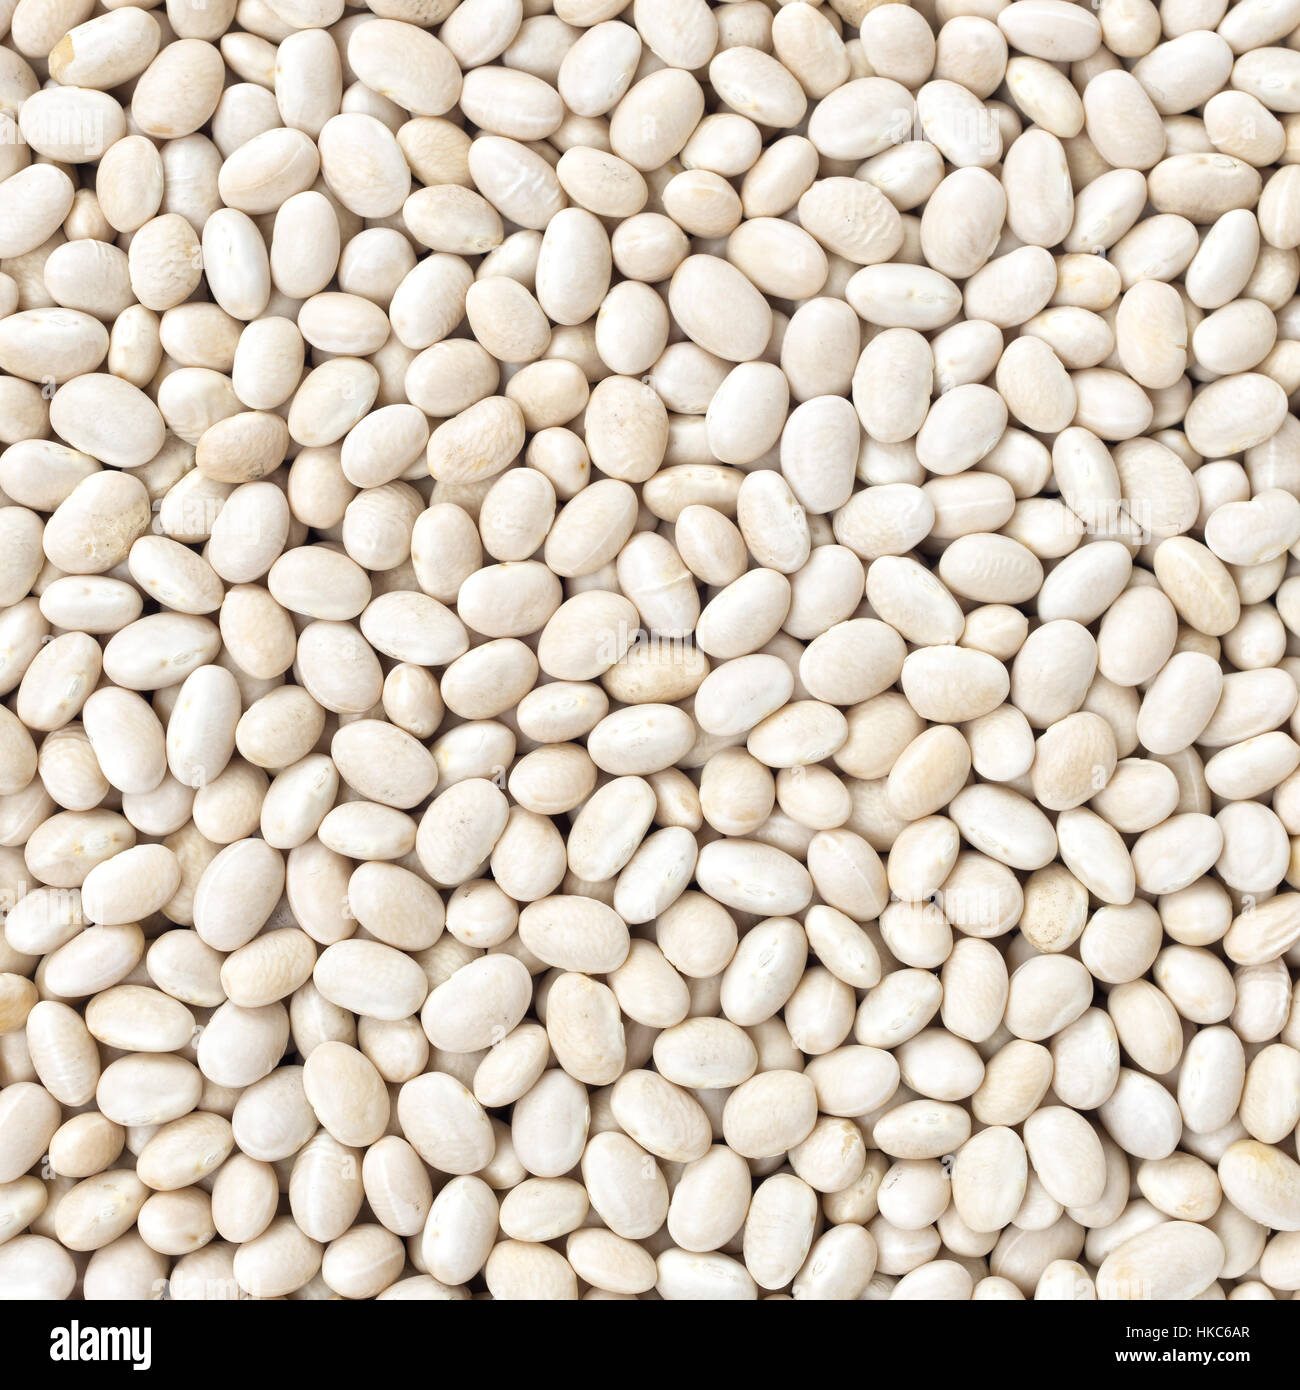 Small Navy, haricot, white pea, white kidney or Cannellini Purgatorio beans texture background or pattern. Raw legume food. Stock Photo